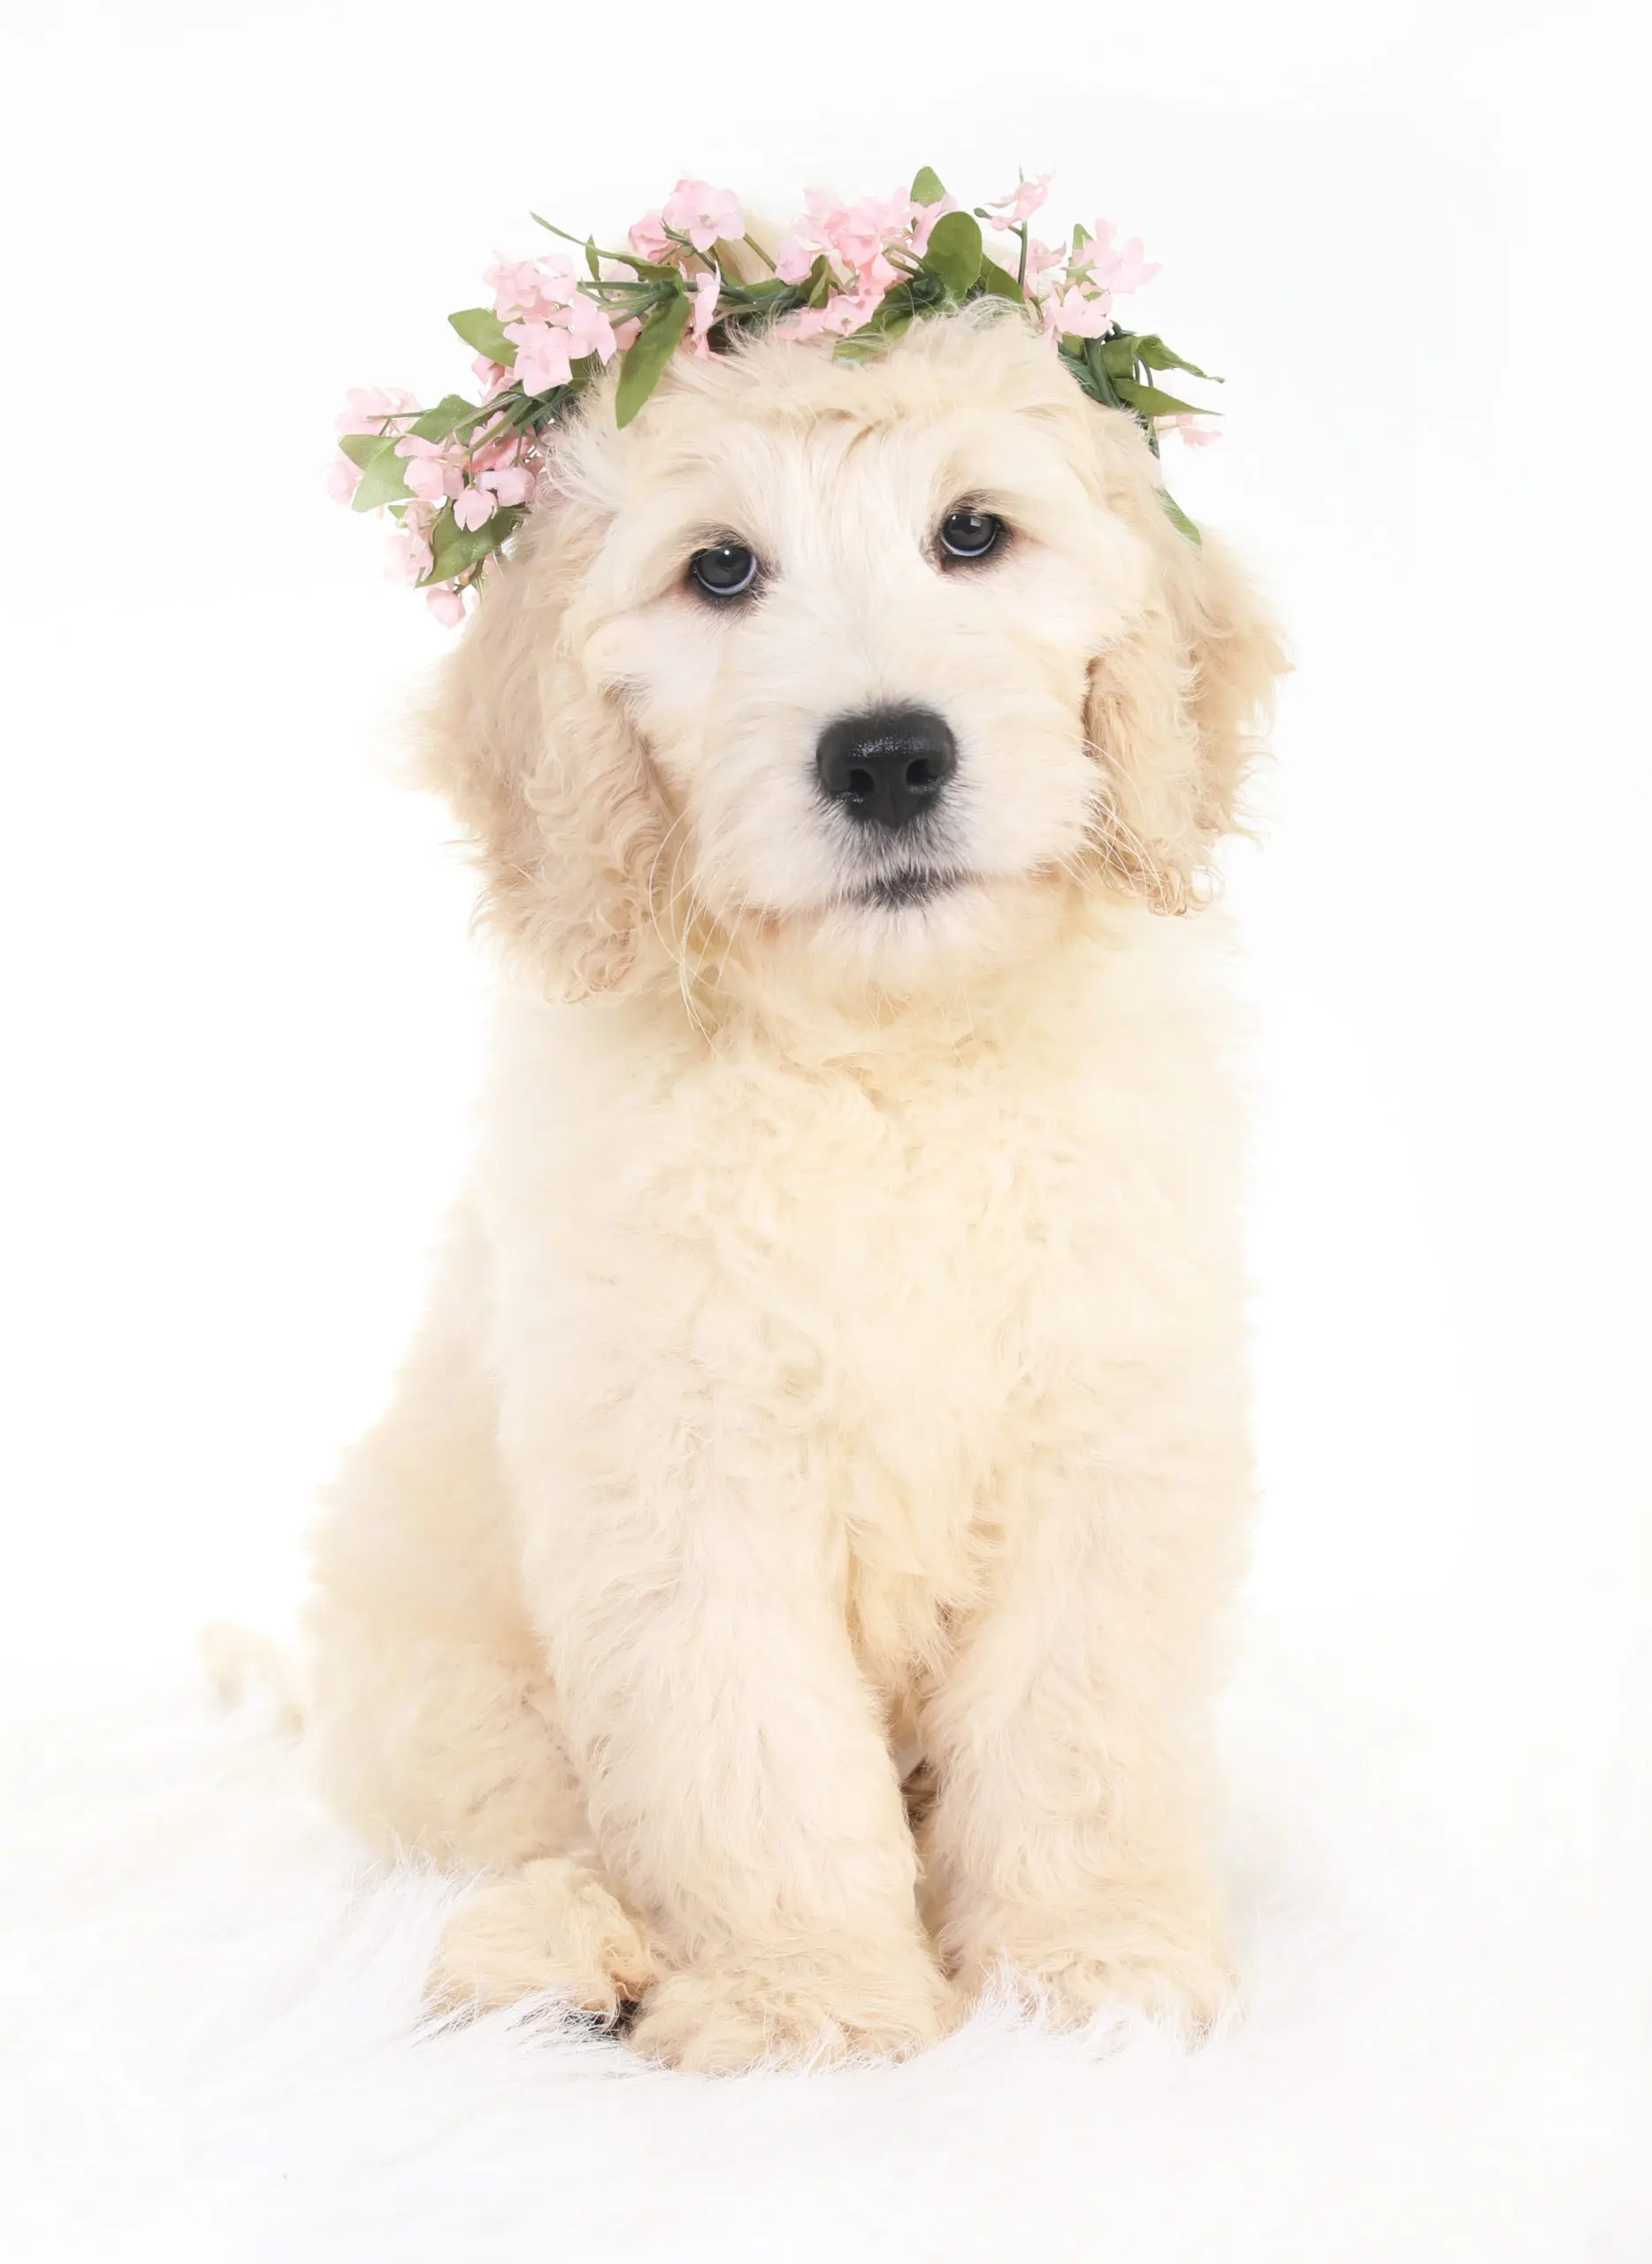 pretty miniature white English teddy bear golden doodle with flowers on her head